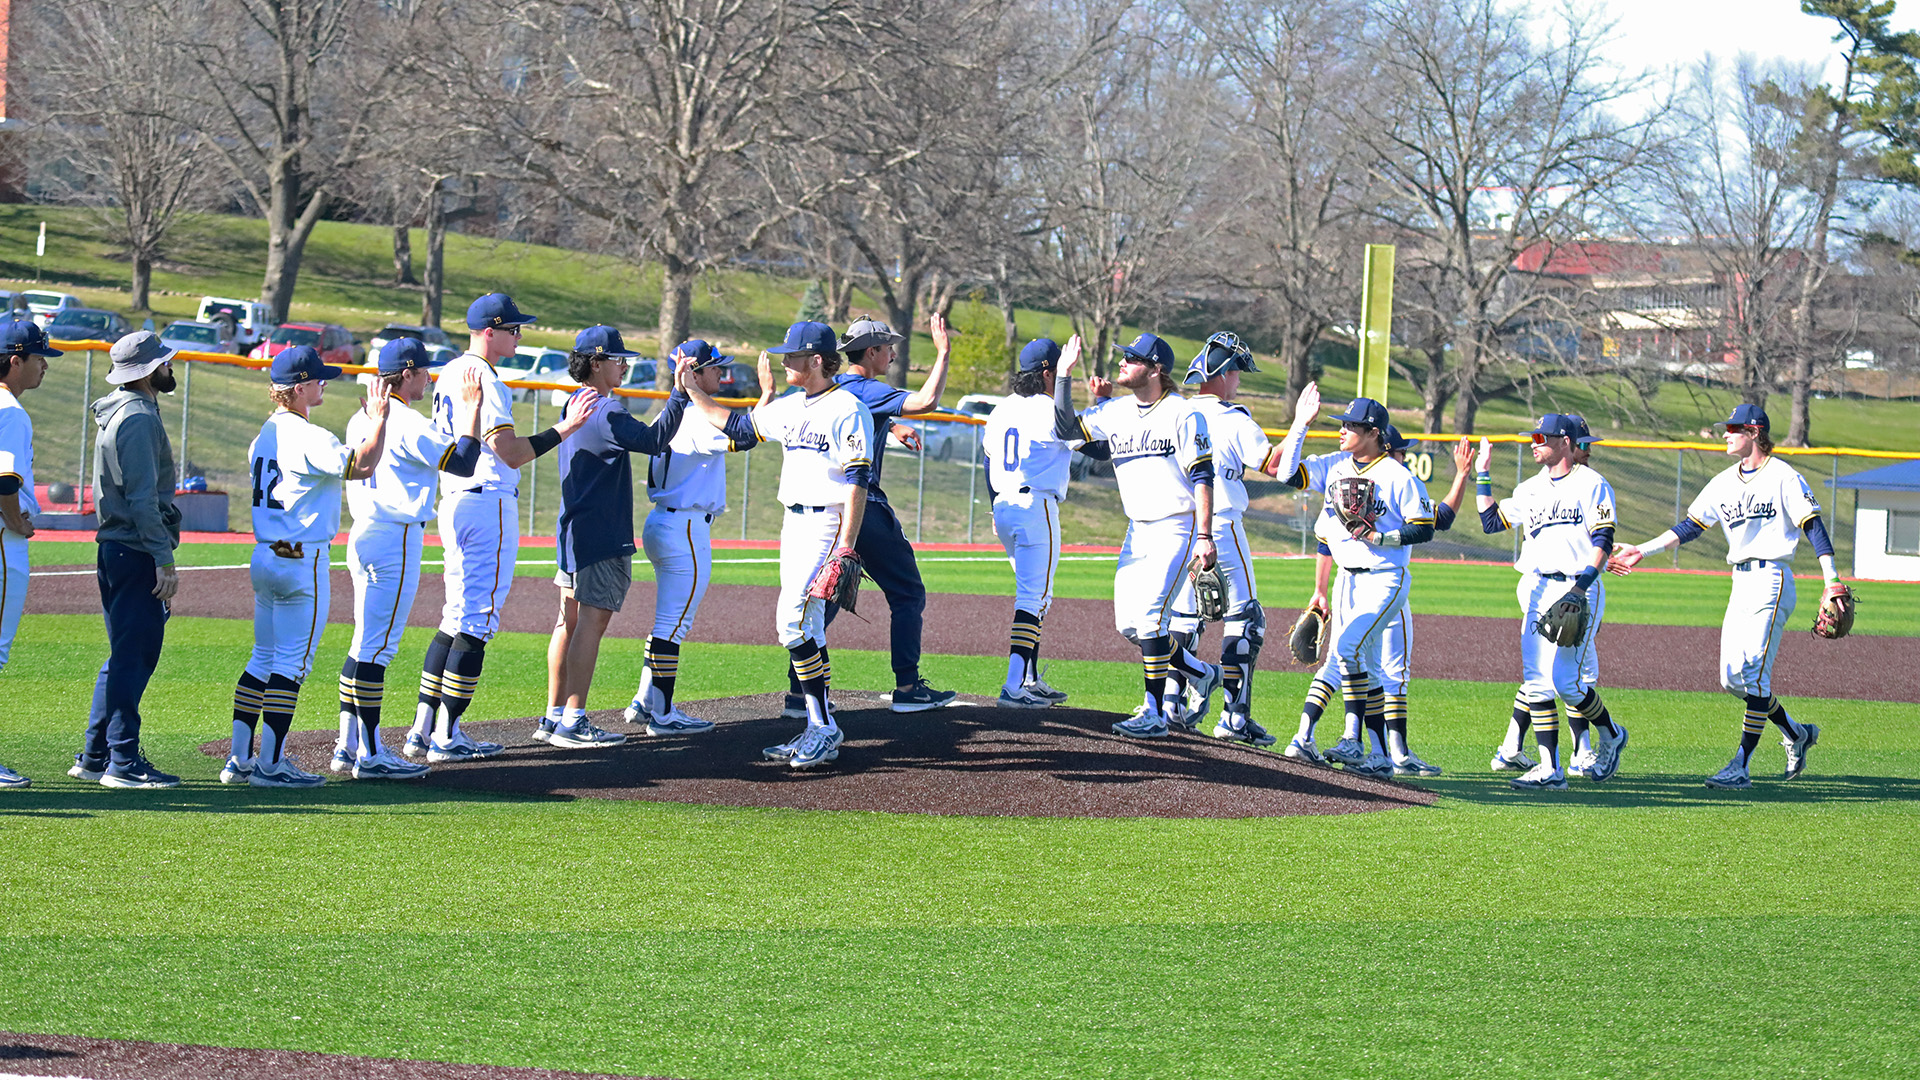 Spires Win 12-4 Over the Swedes for Mid-Week Series Sweep